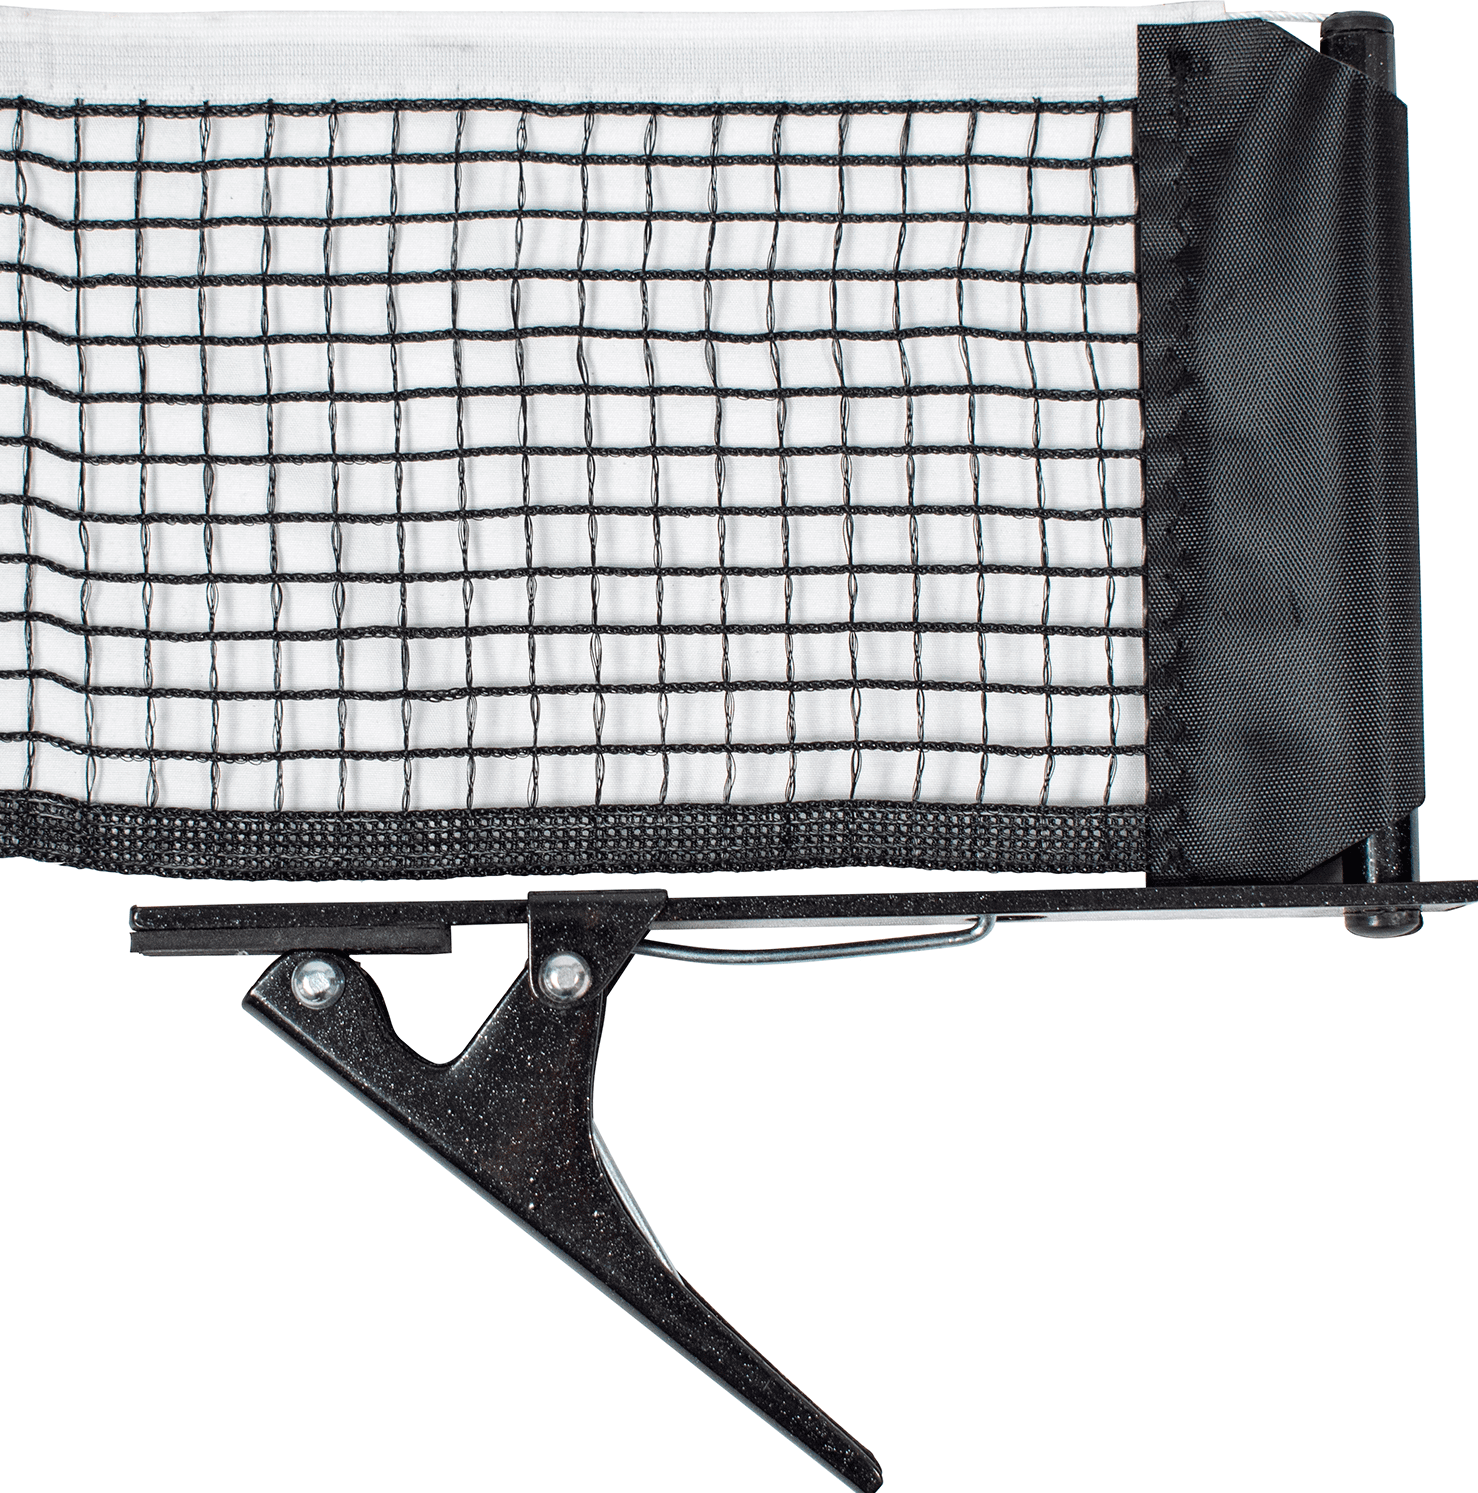 Brand New Butterfly Economy Clip Table Tennis Net & Post Set In Carrying Bag 